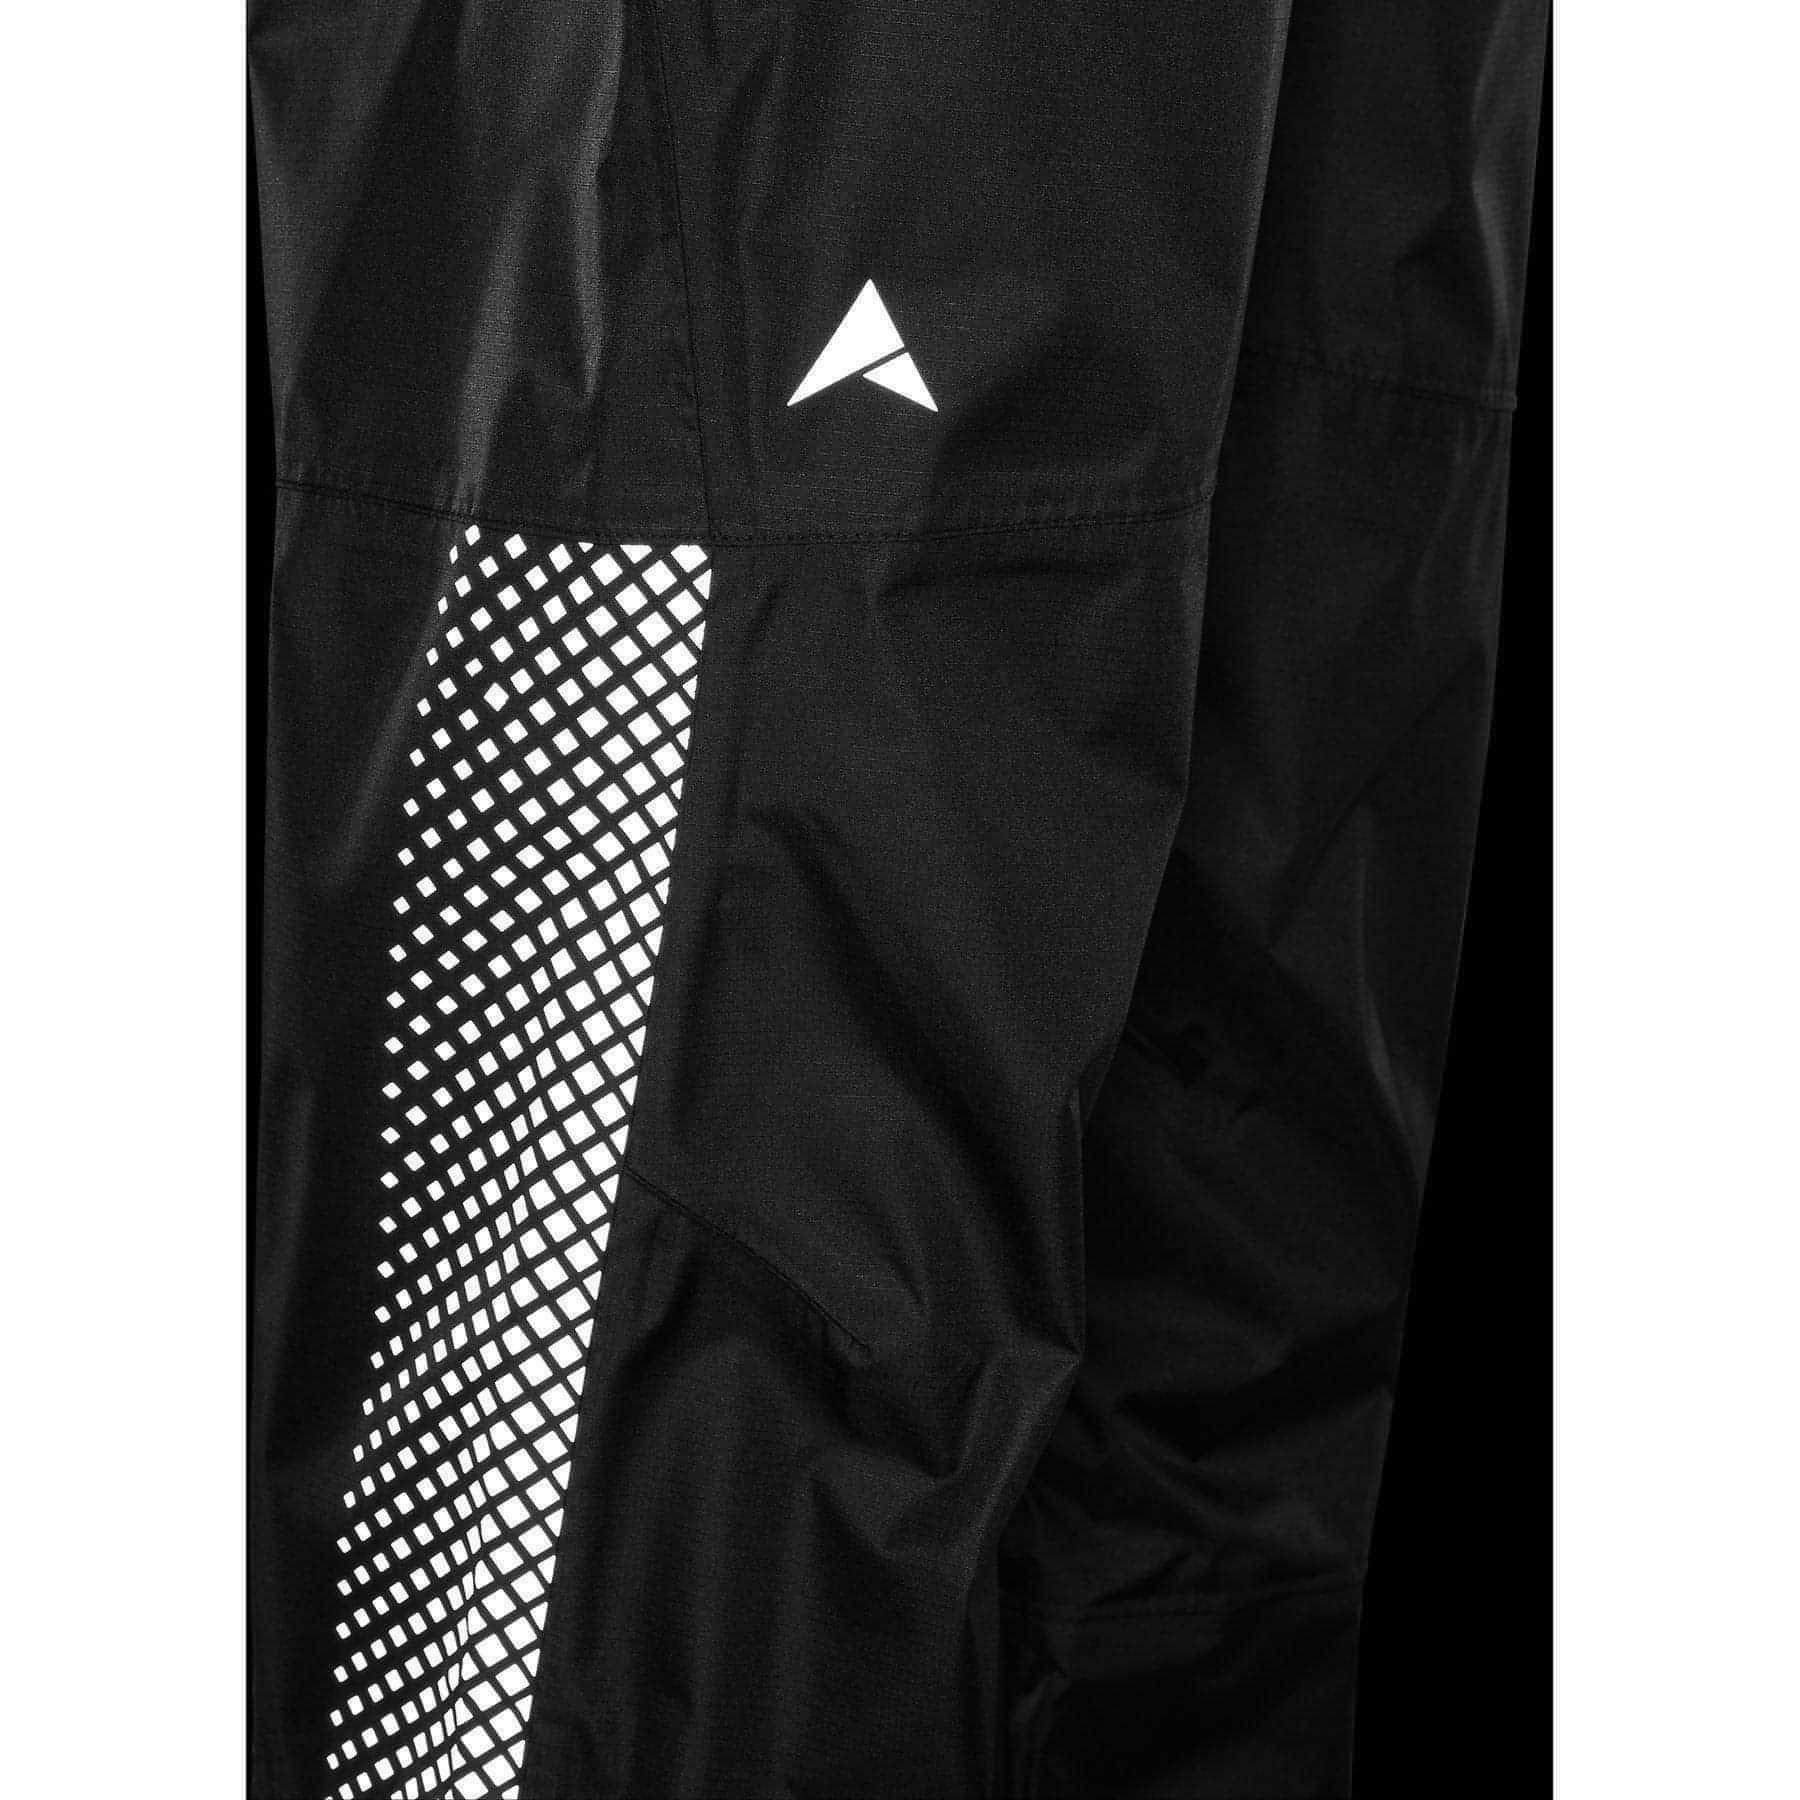 Altura Nightvision Mens Cycling Over Trousers - Black - Start Fitness